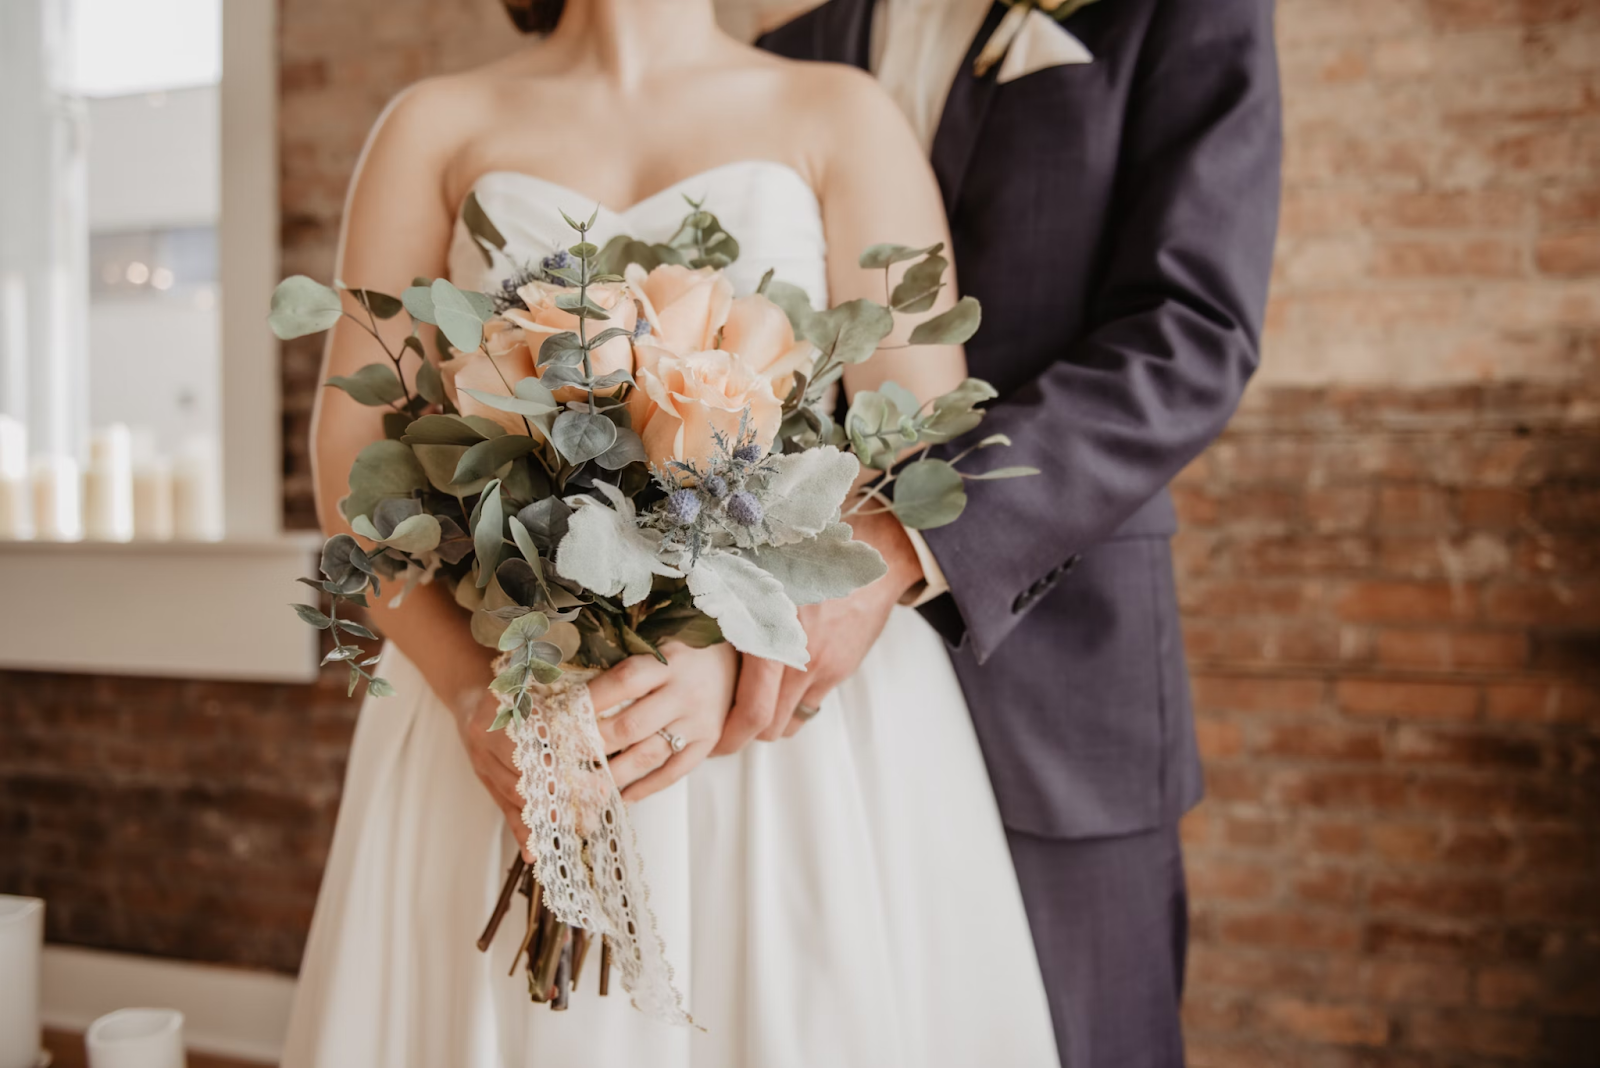 Advice for Planning a Valentine's Day Wedding